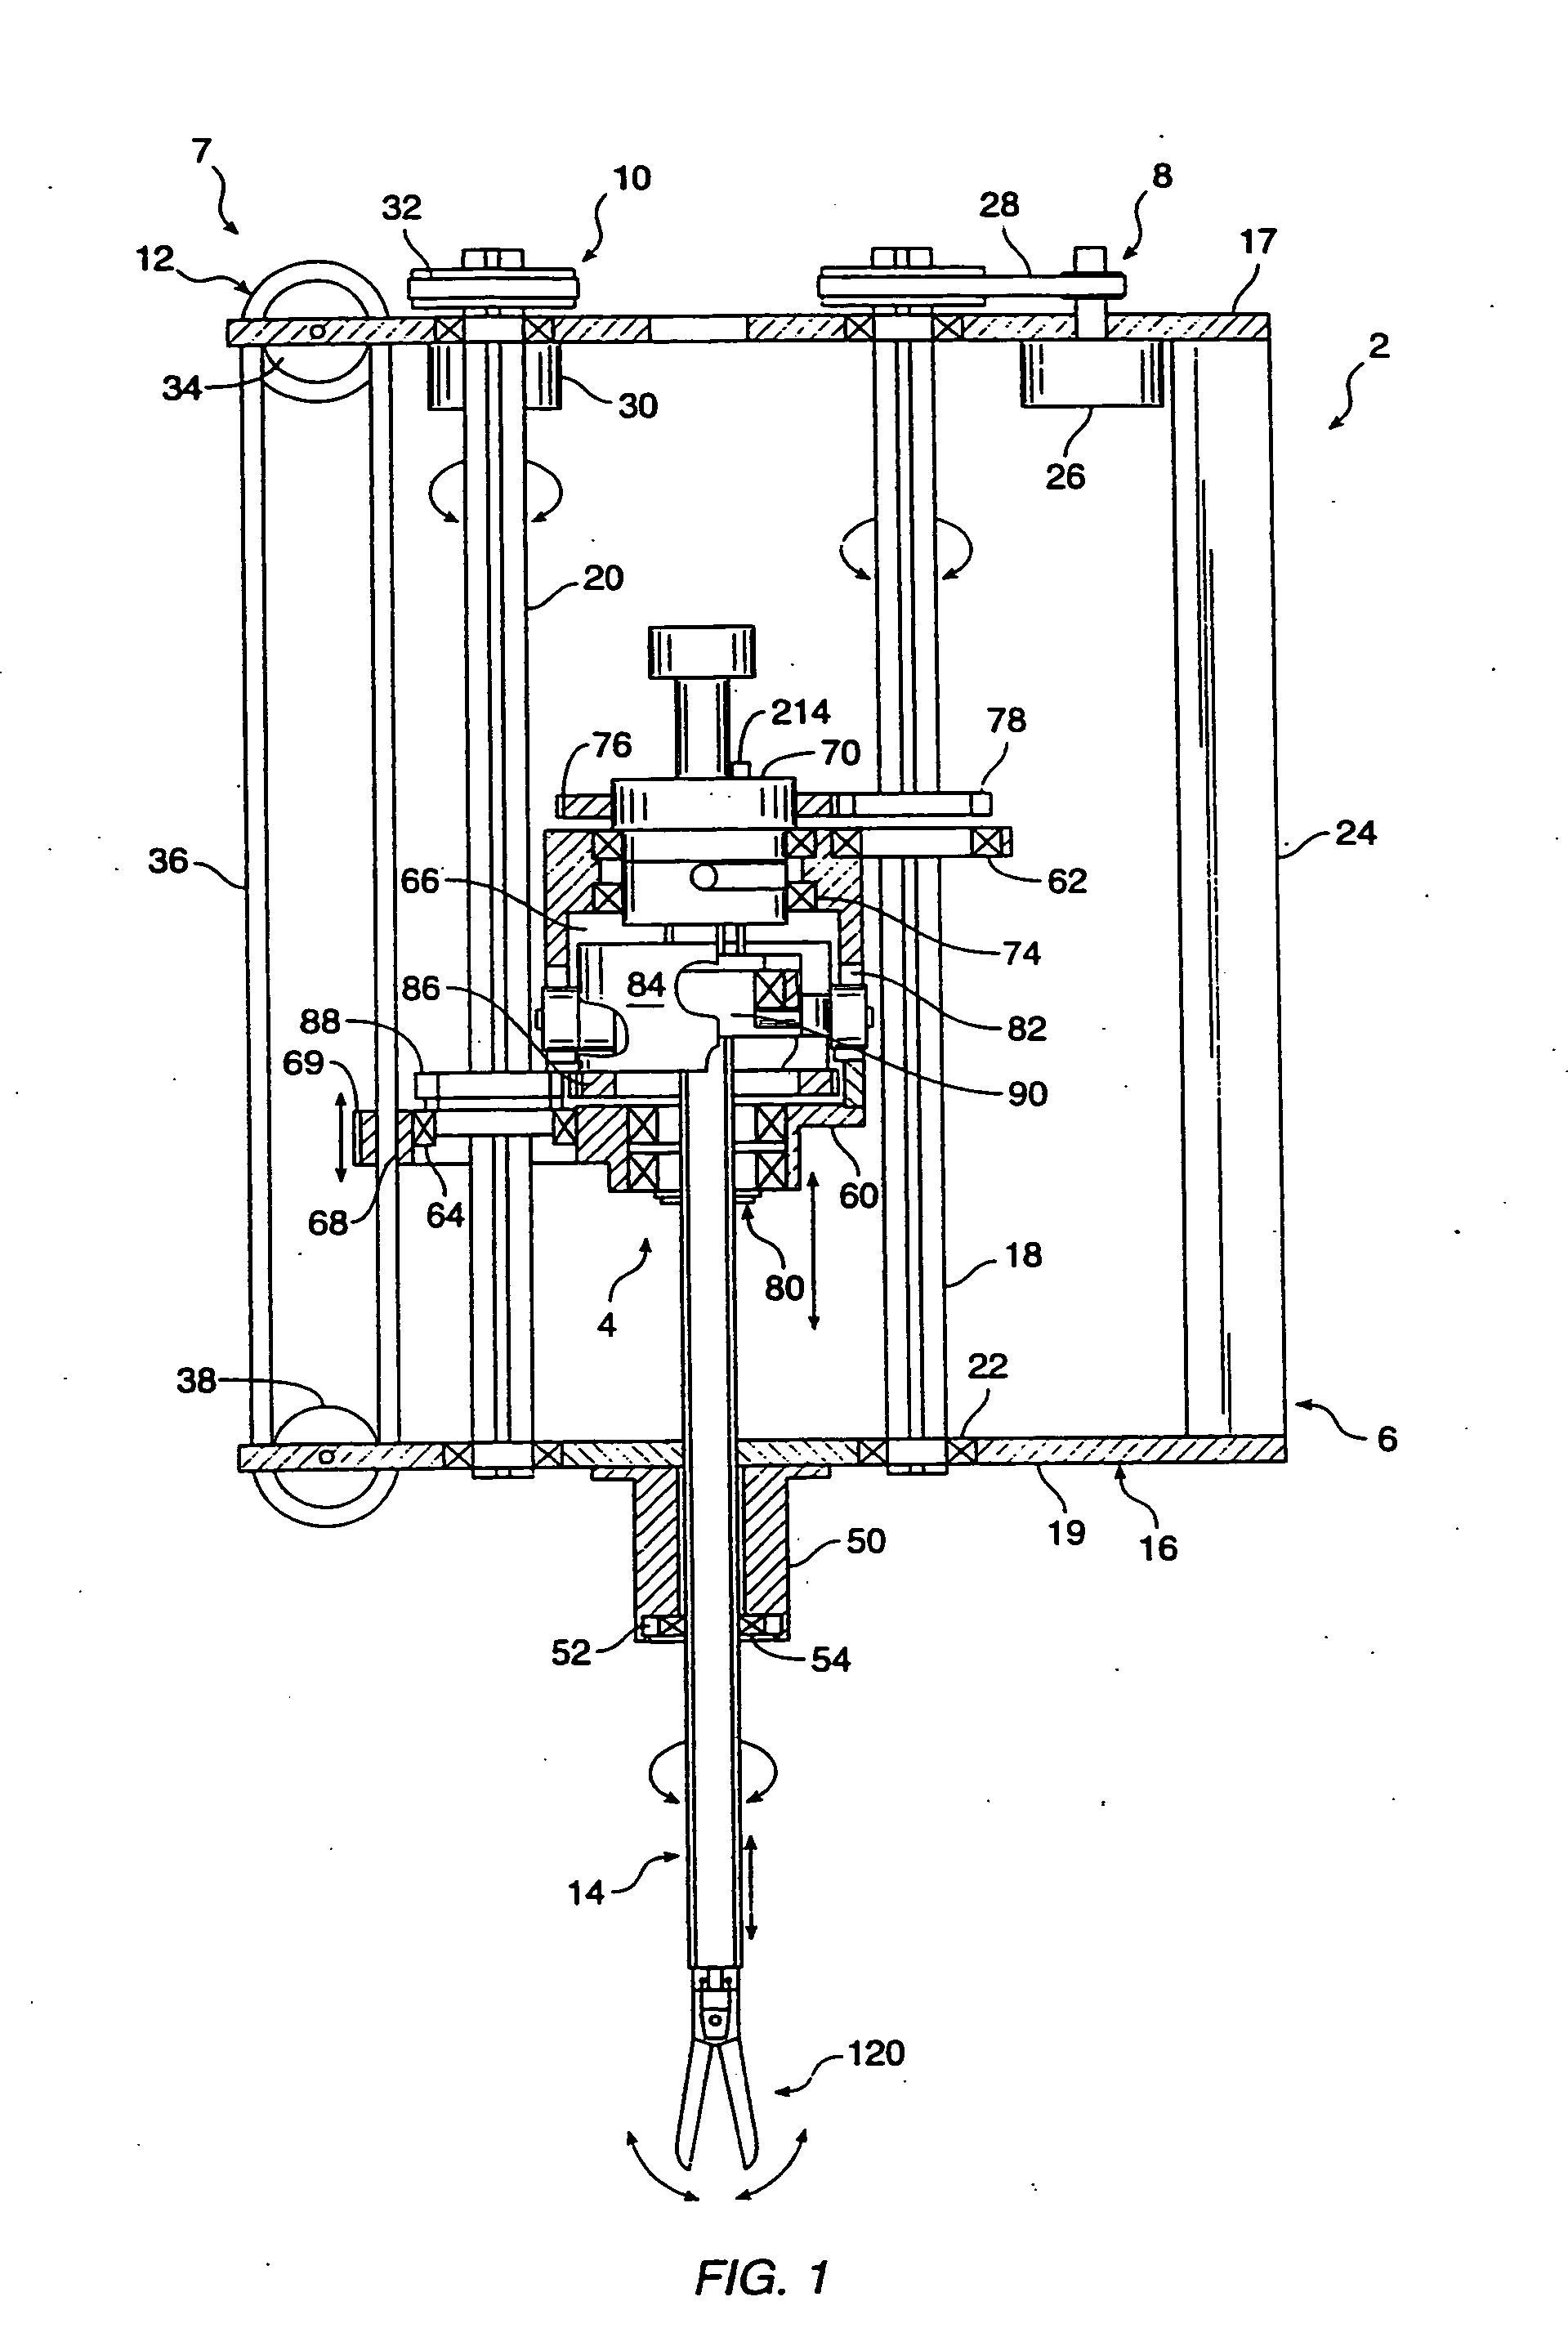 System and method for releasably holding a surgical instrument